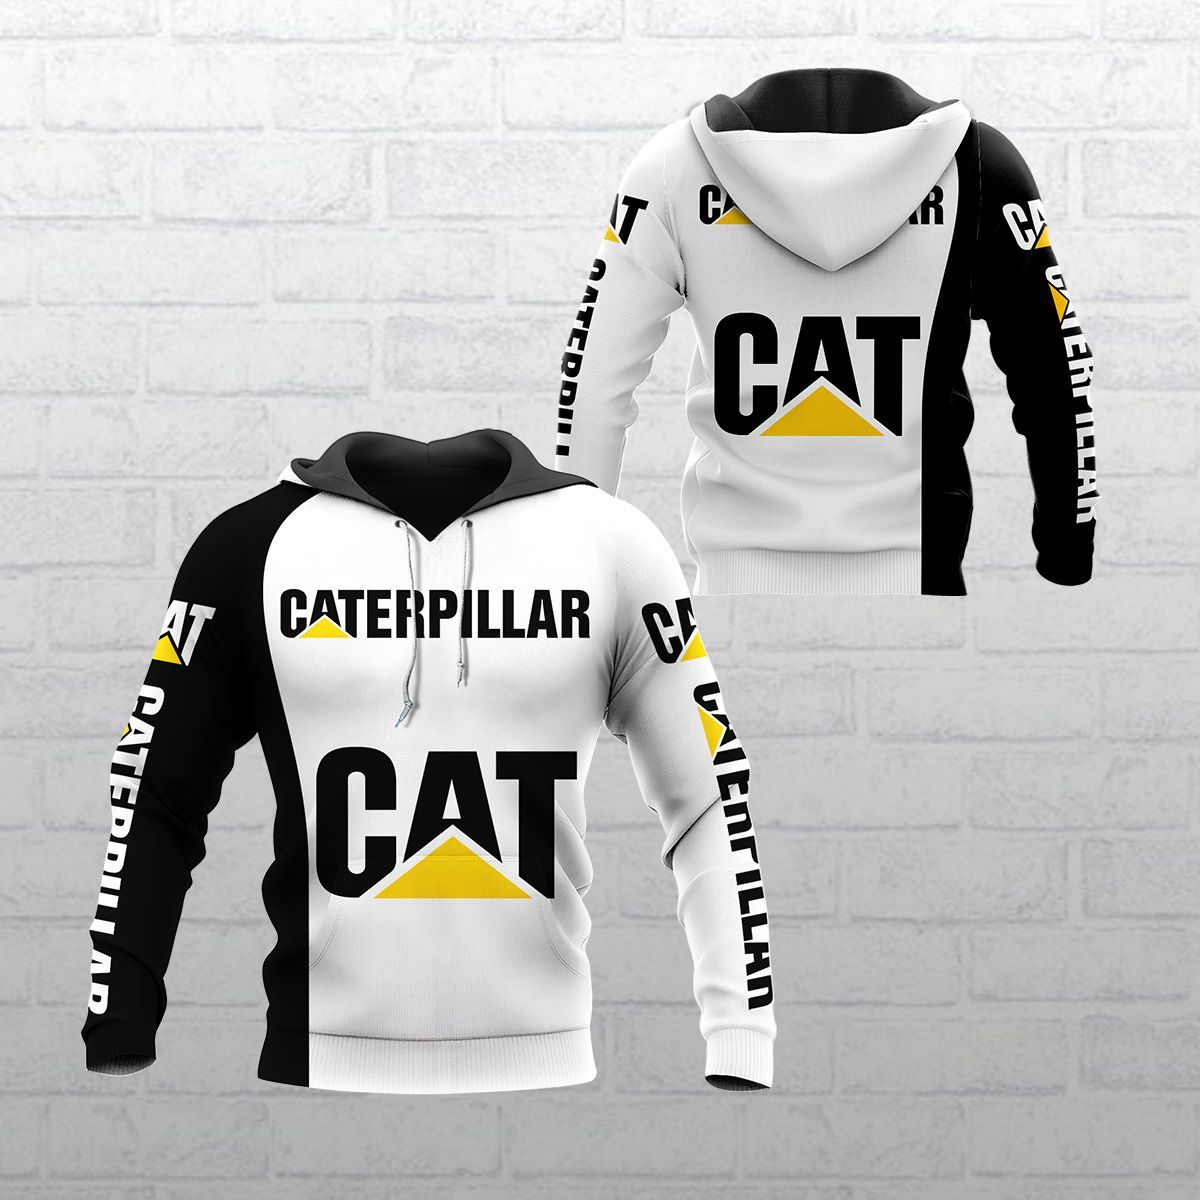 3D All Over Printed Caterpillar LPH-HA Shirts Ver1 (White)